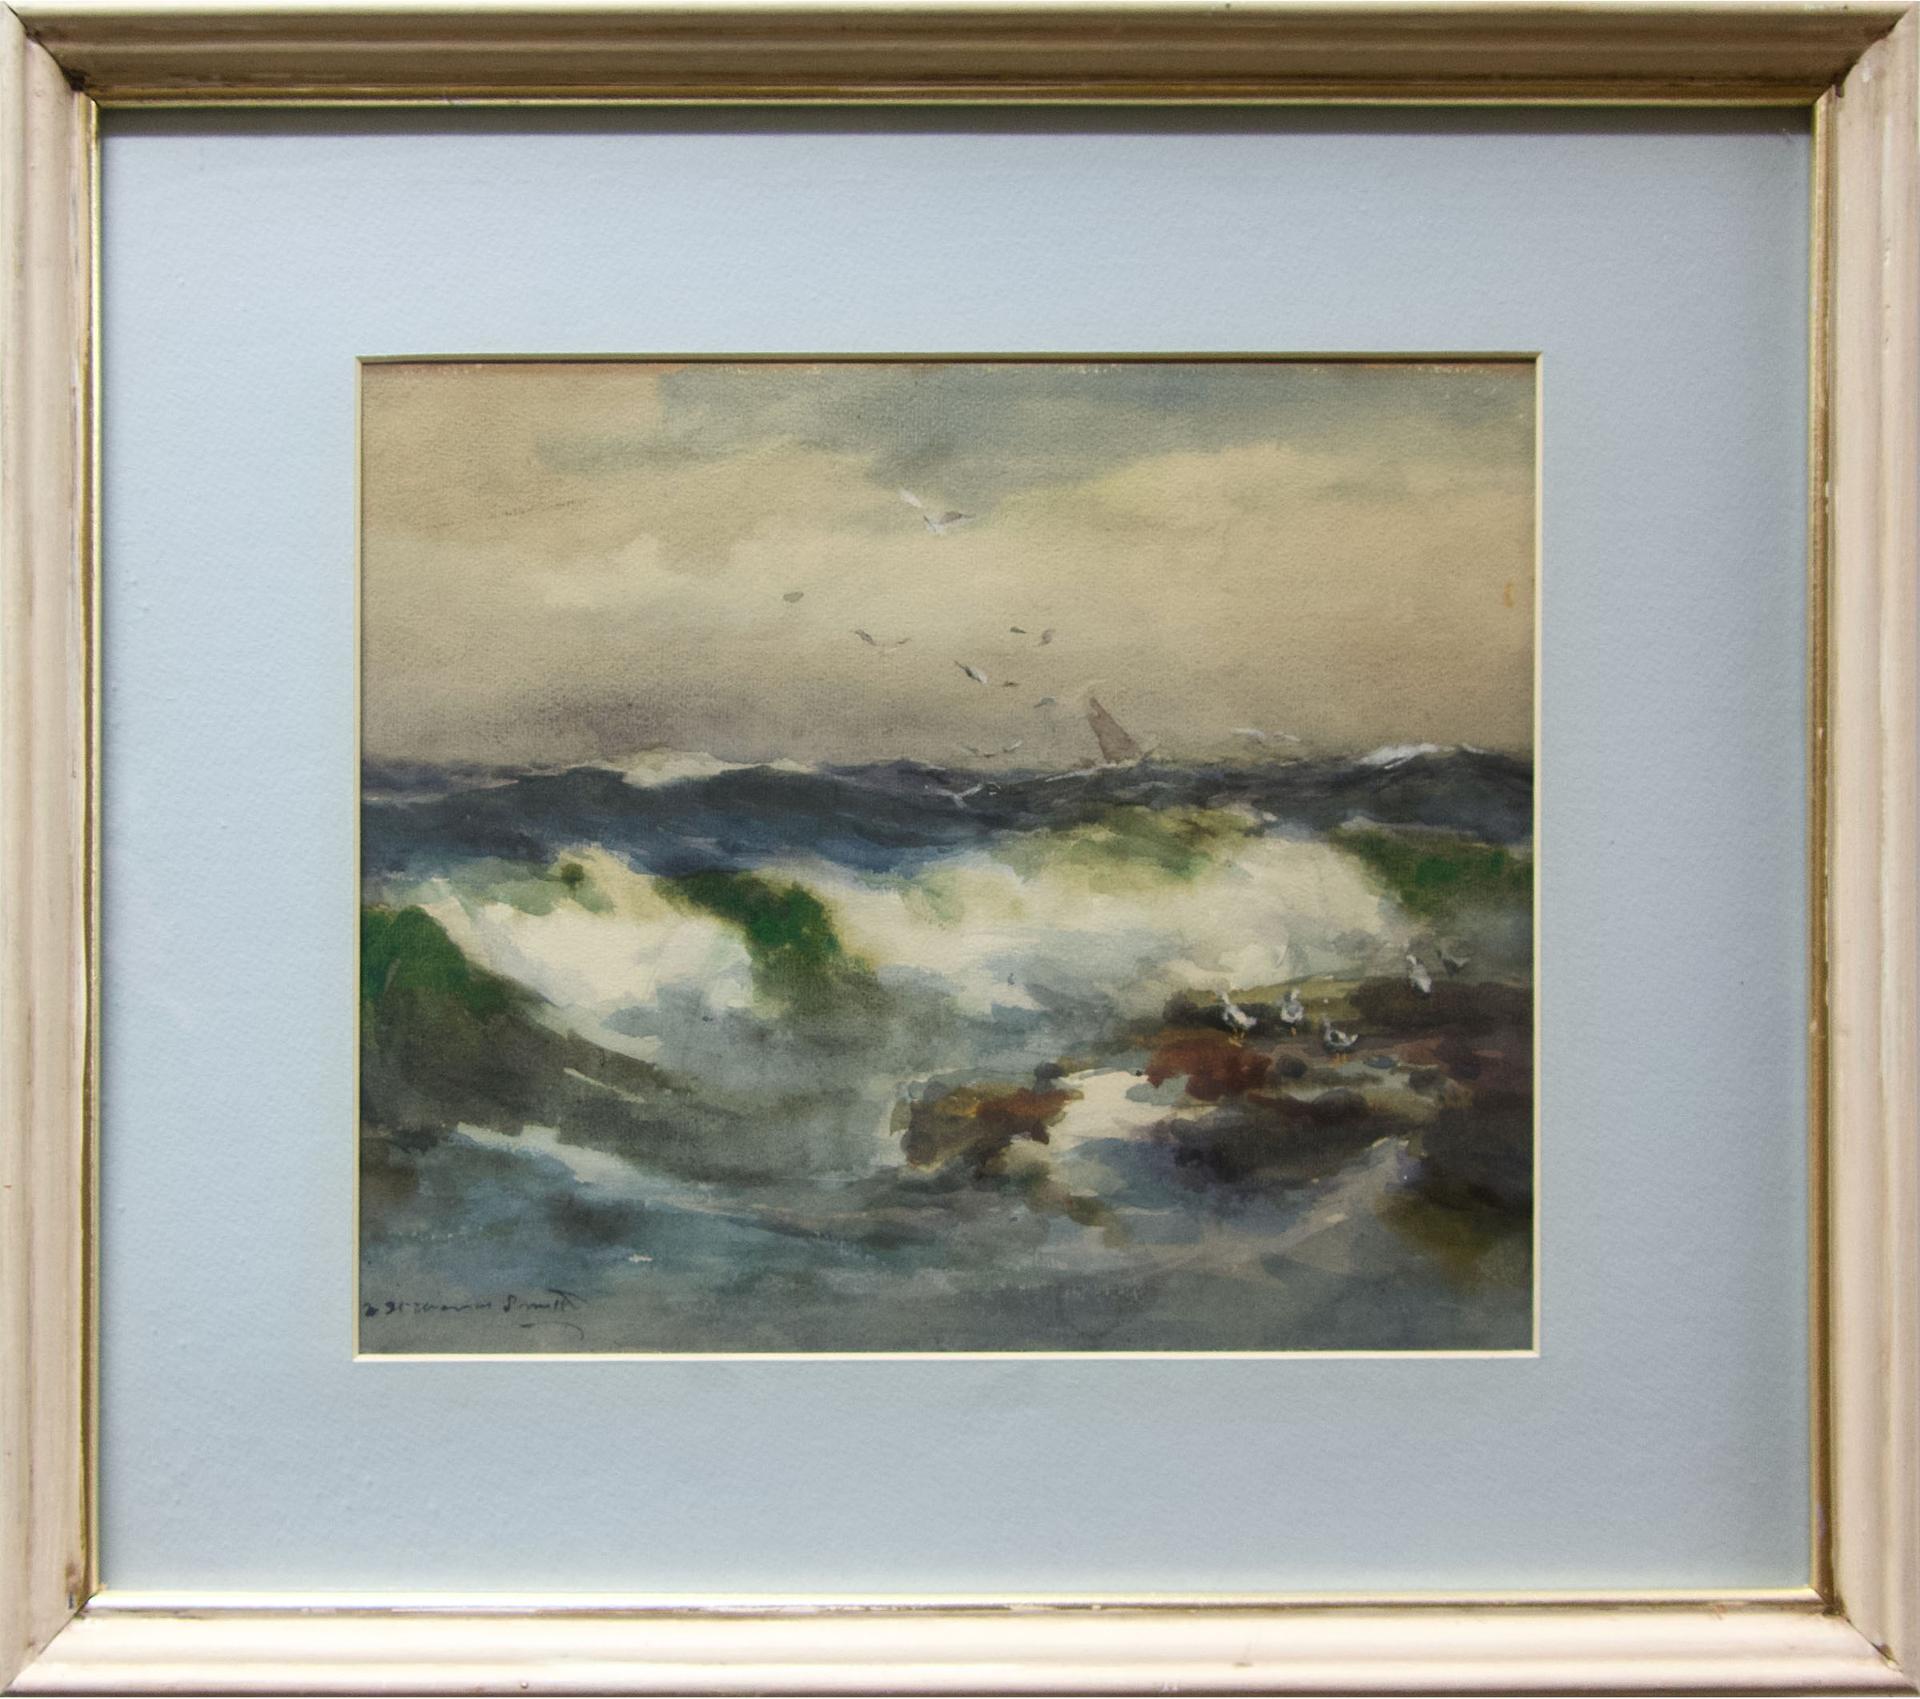 William St. Thomas Smith (1862-1947) - Untitled (Sailing In Heavy Waters)